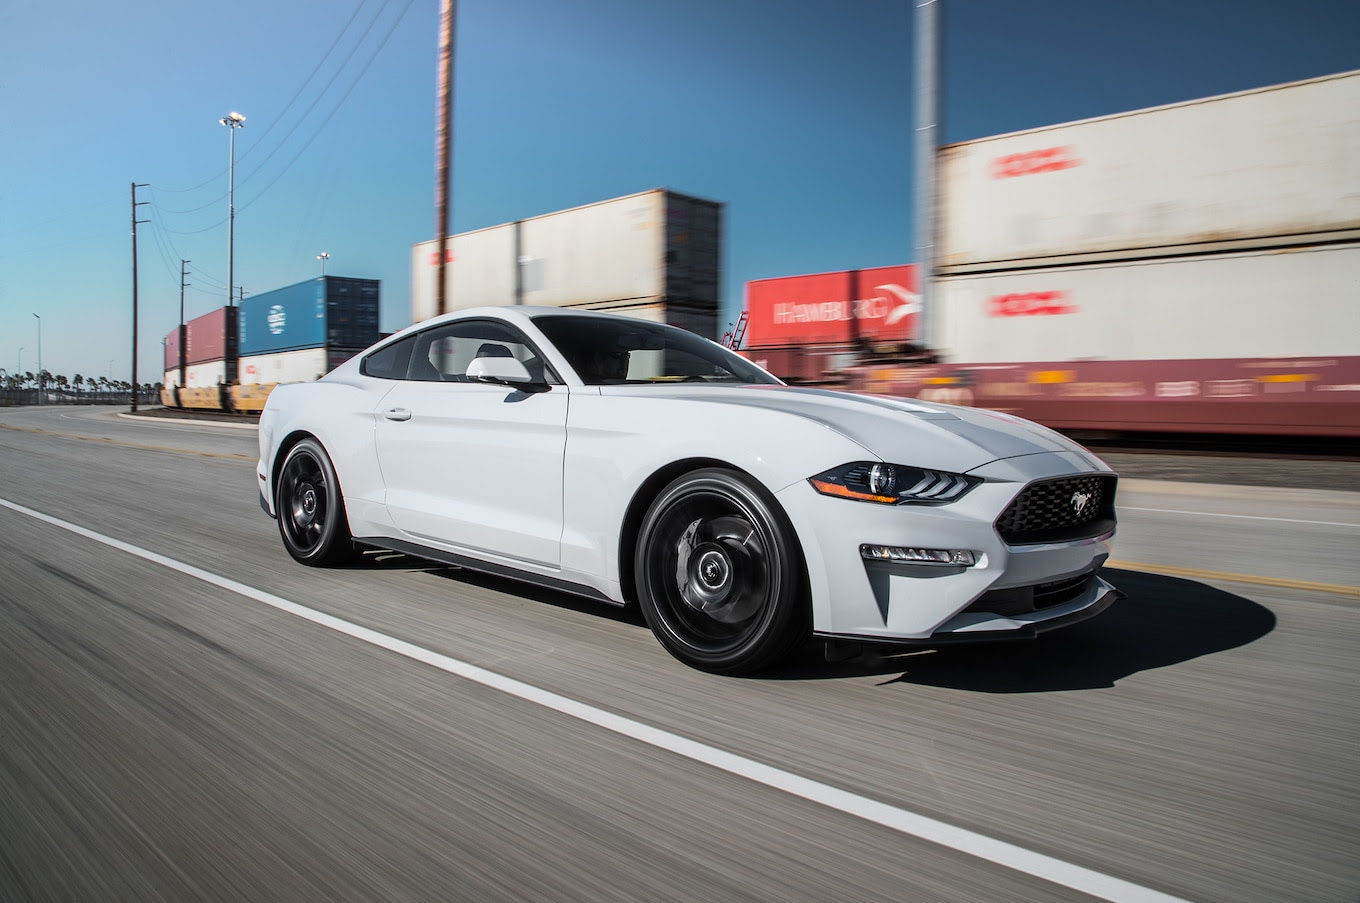 1 best of : 2020 Mustang Hybrid: What to Expect From Ford’s First